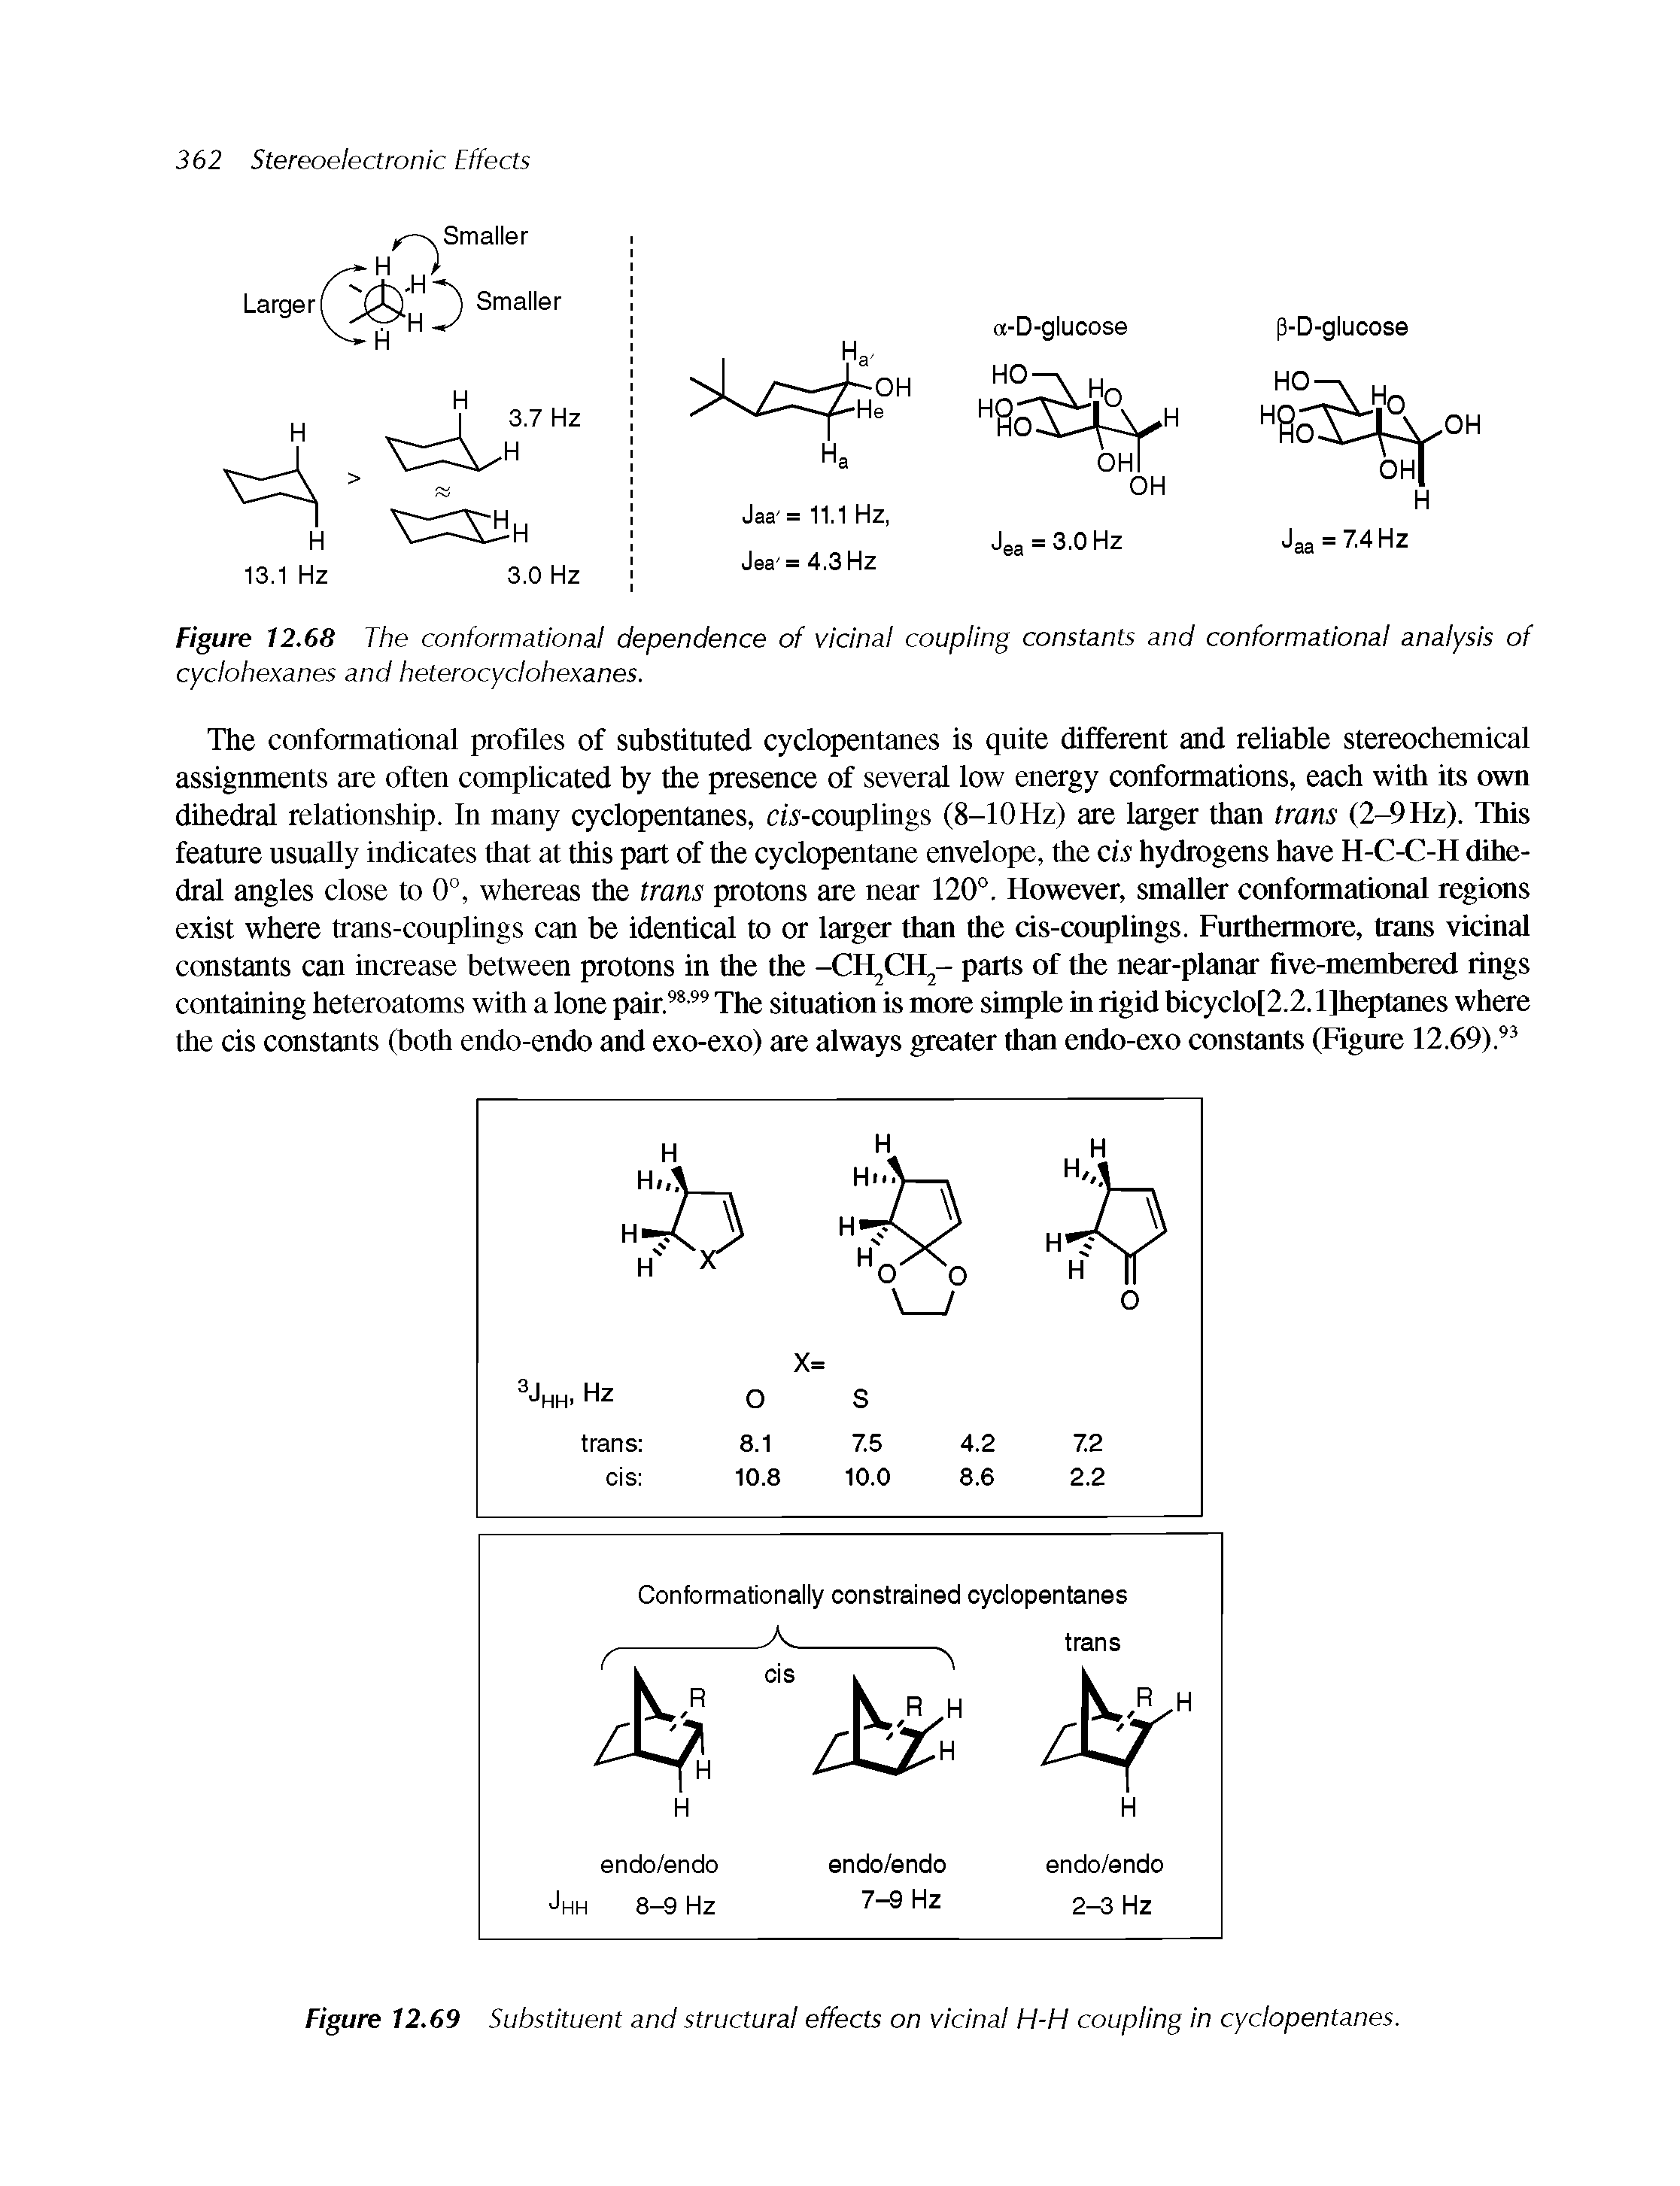 Figure 12.68 The conformational dependence of vicinal coupling constants and conformational analysis of cyclohexanes and heterocyclohexanes.